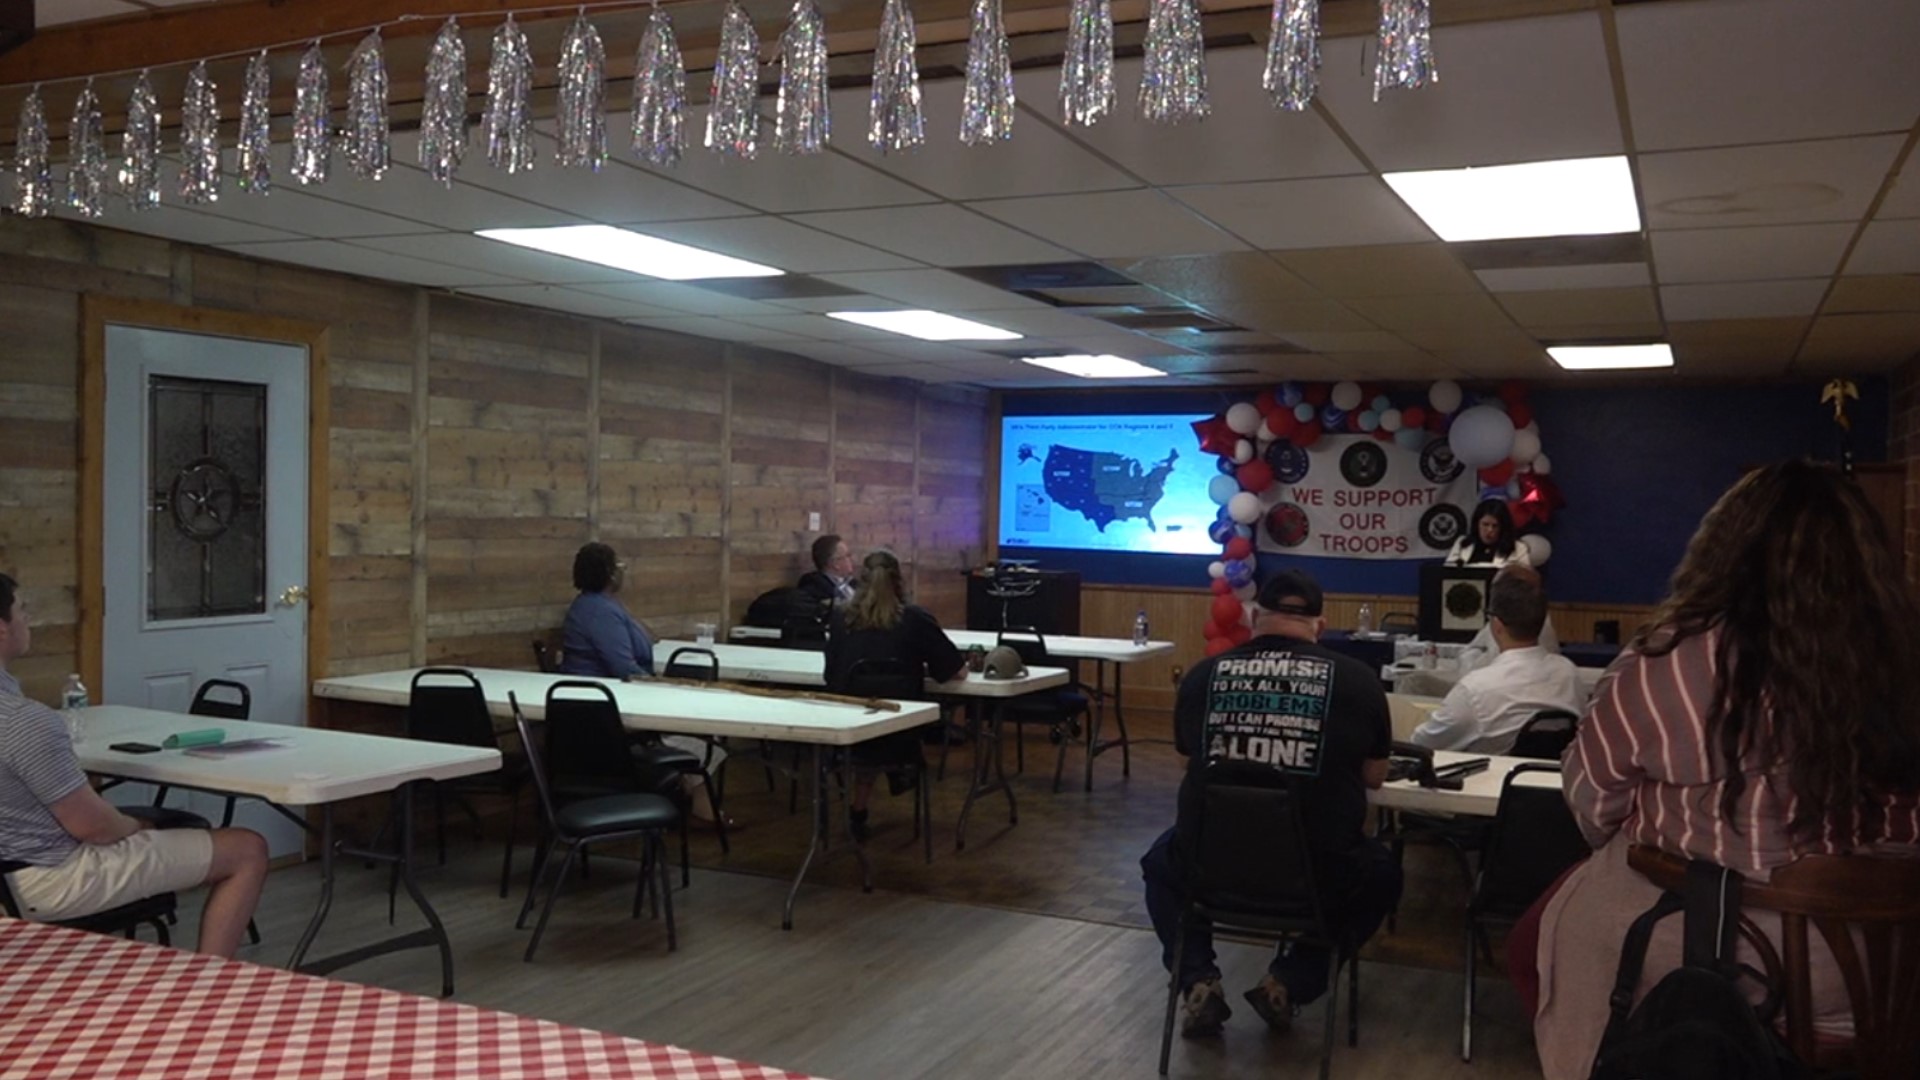 Veterans met with representatives of TriWest Health Care and the Veterans Affairs Community Care Network at the American Legion Post 33 in Beaumont to ask questions.